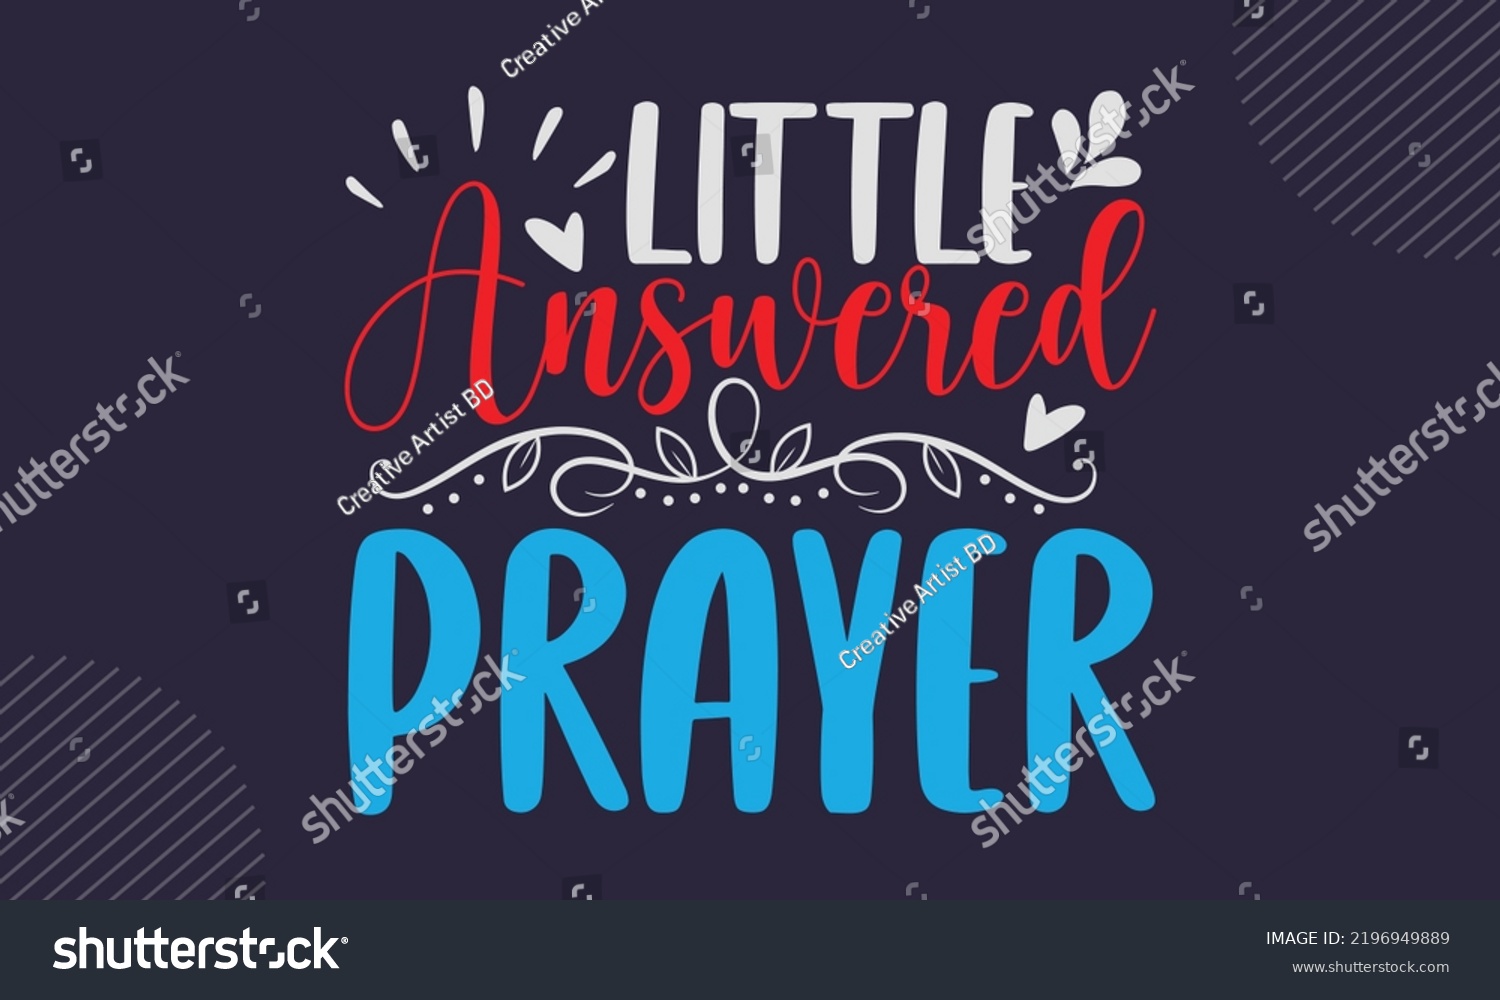 SVG of Little Answered Prayer - Baby T shirt Design, Hand drawn vintage illustration with hand-lettering and decoration elements, Cut Files for Cricut Svg, Digital Download svg